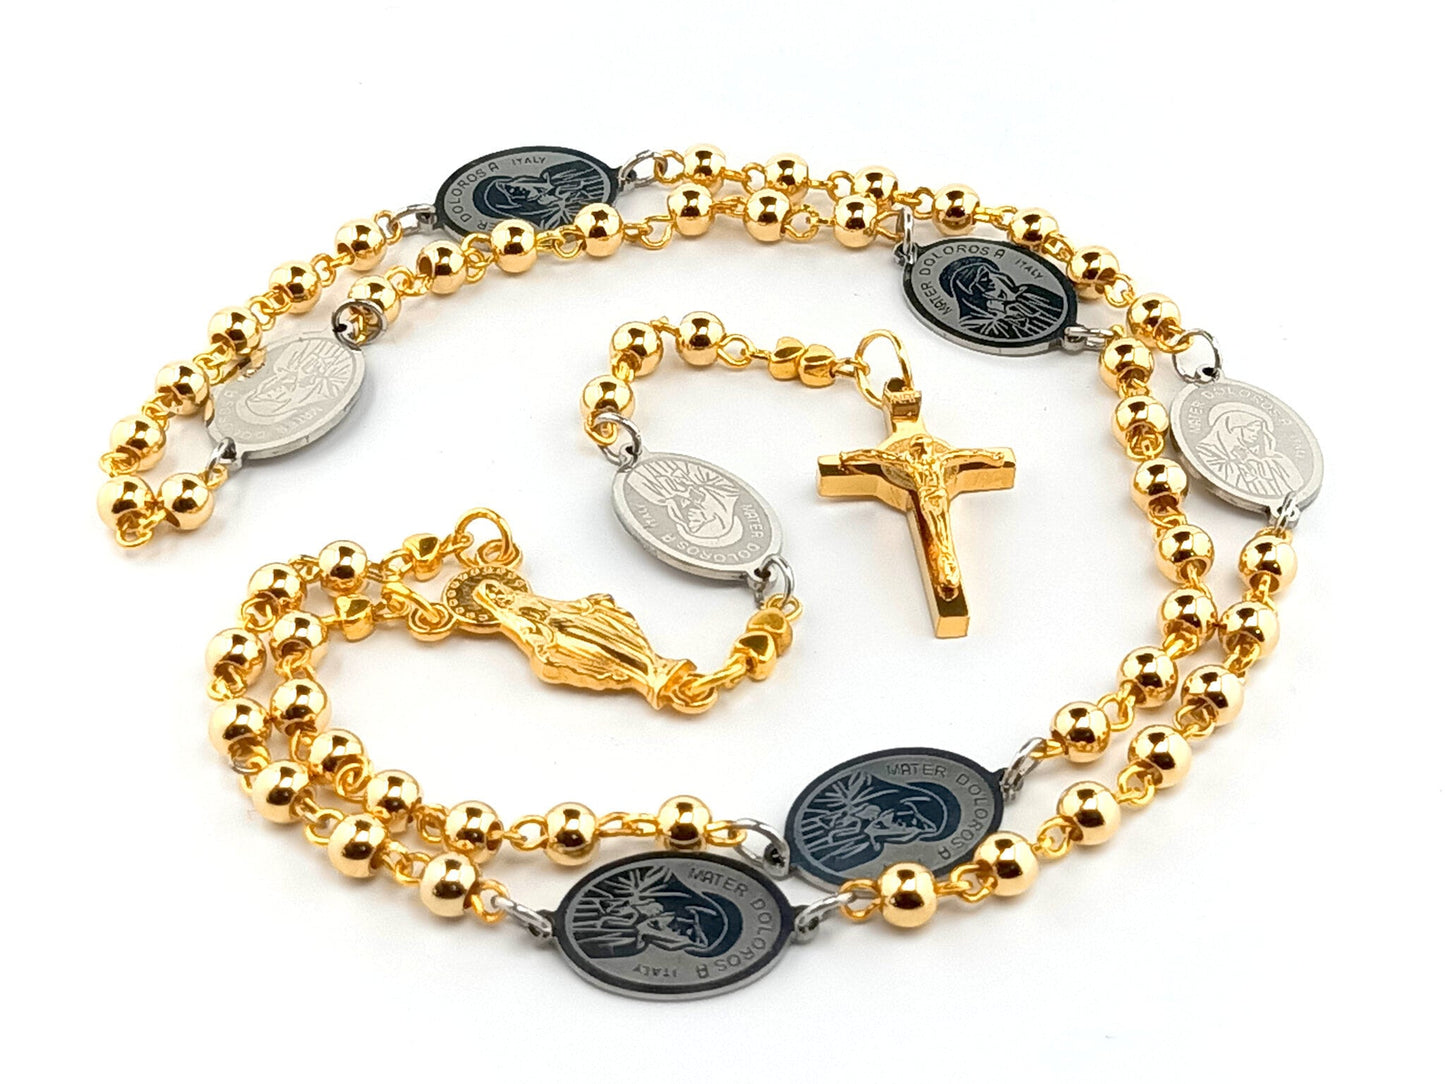 Our Lady of Sorrows unique rosary beads dolor rosary with gold plated stainless steel beads, stainless steel dolor medals and Saint Benedict crucifix.